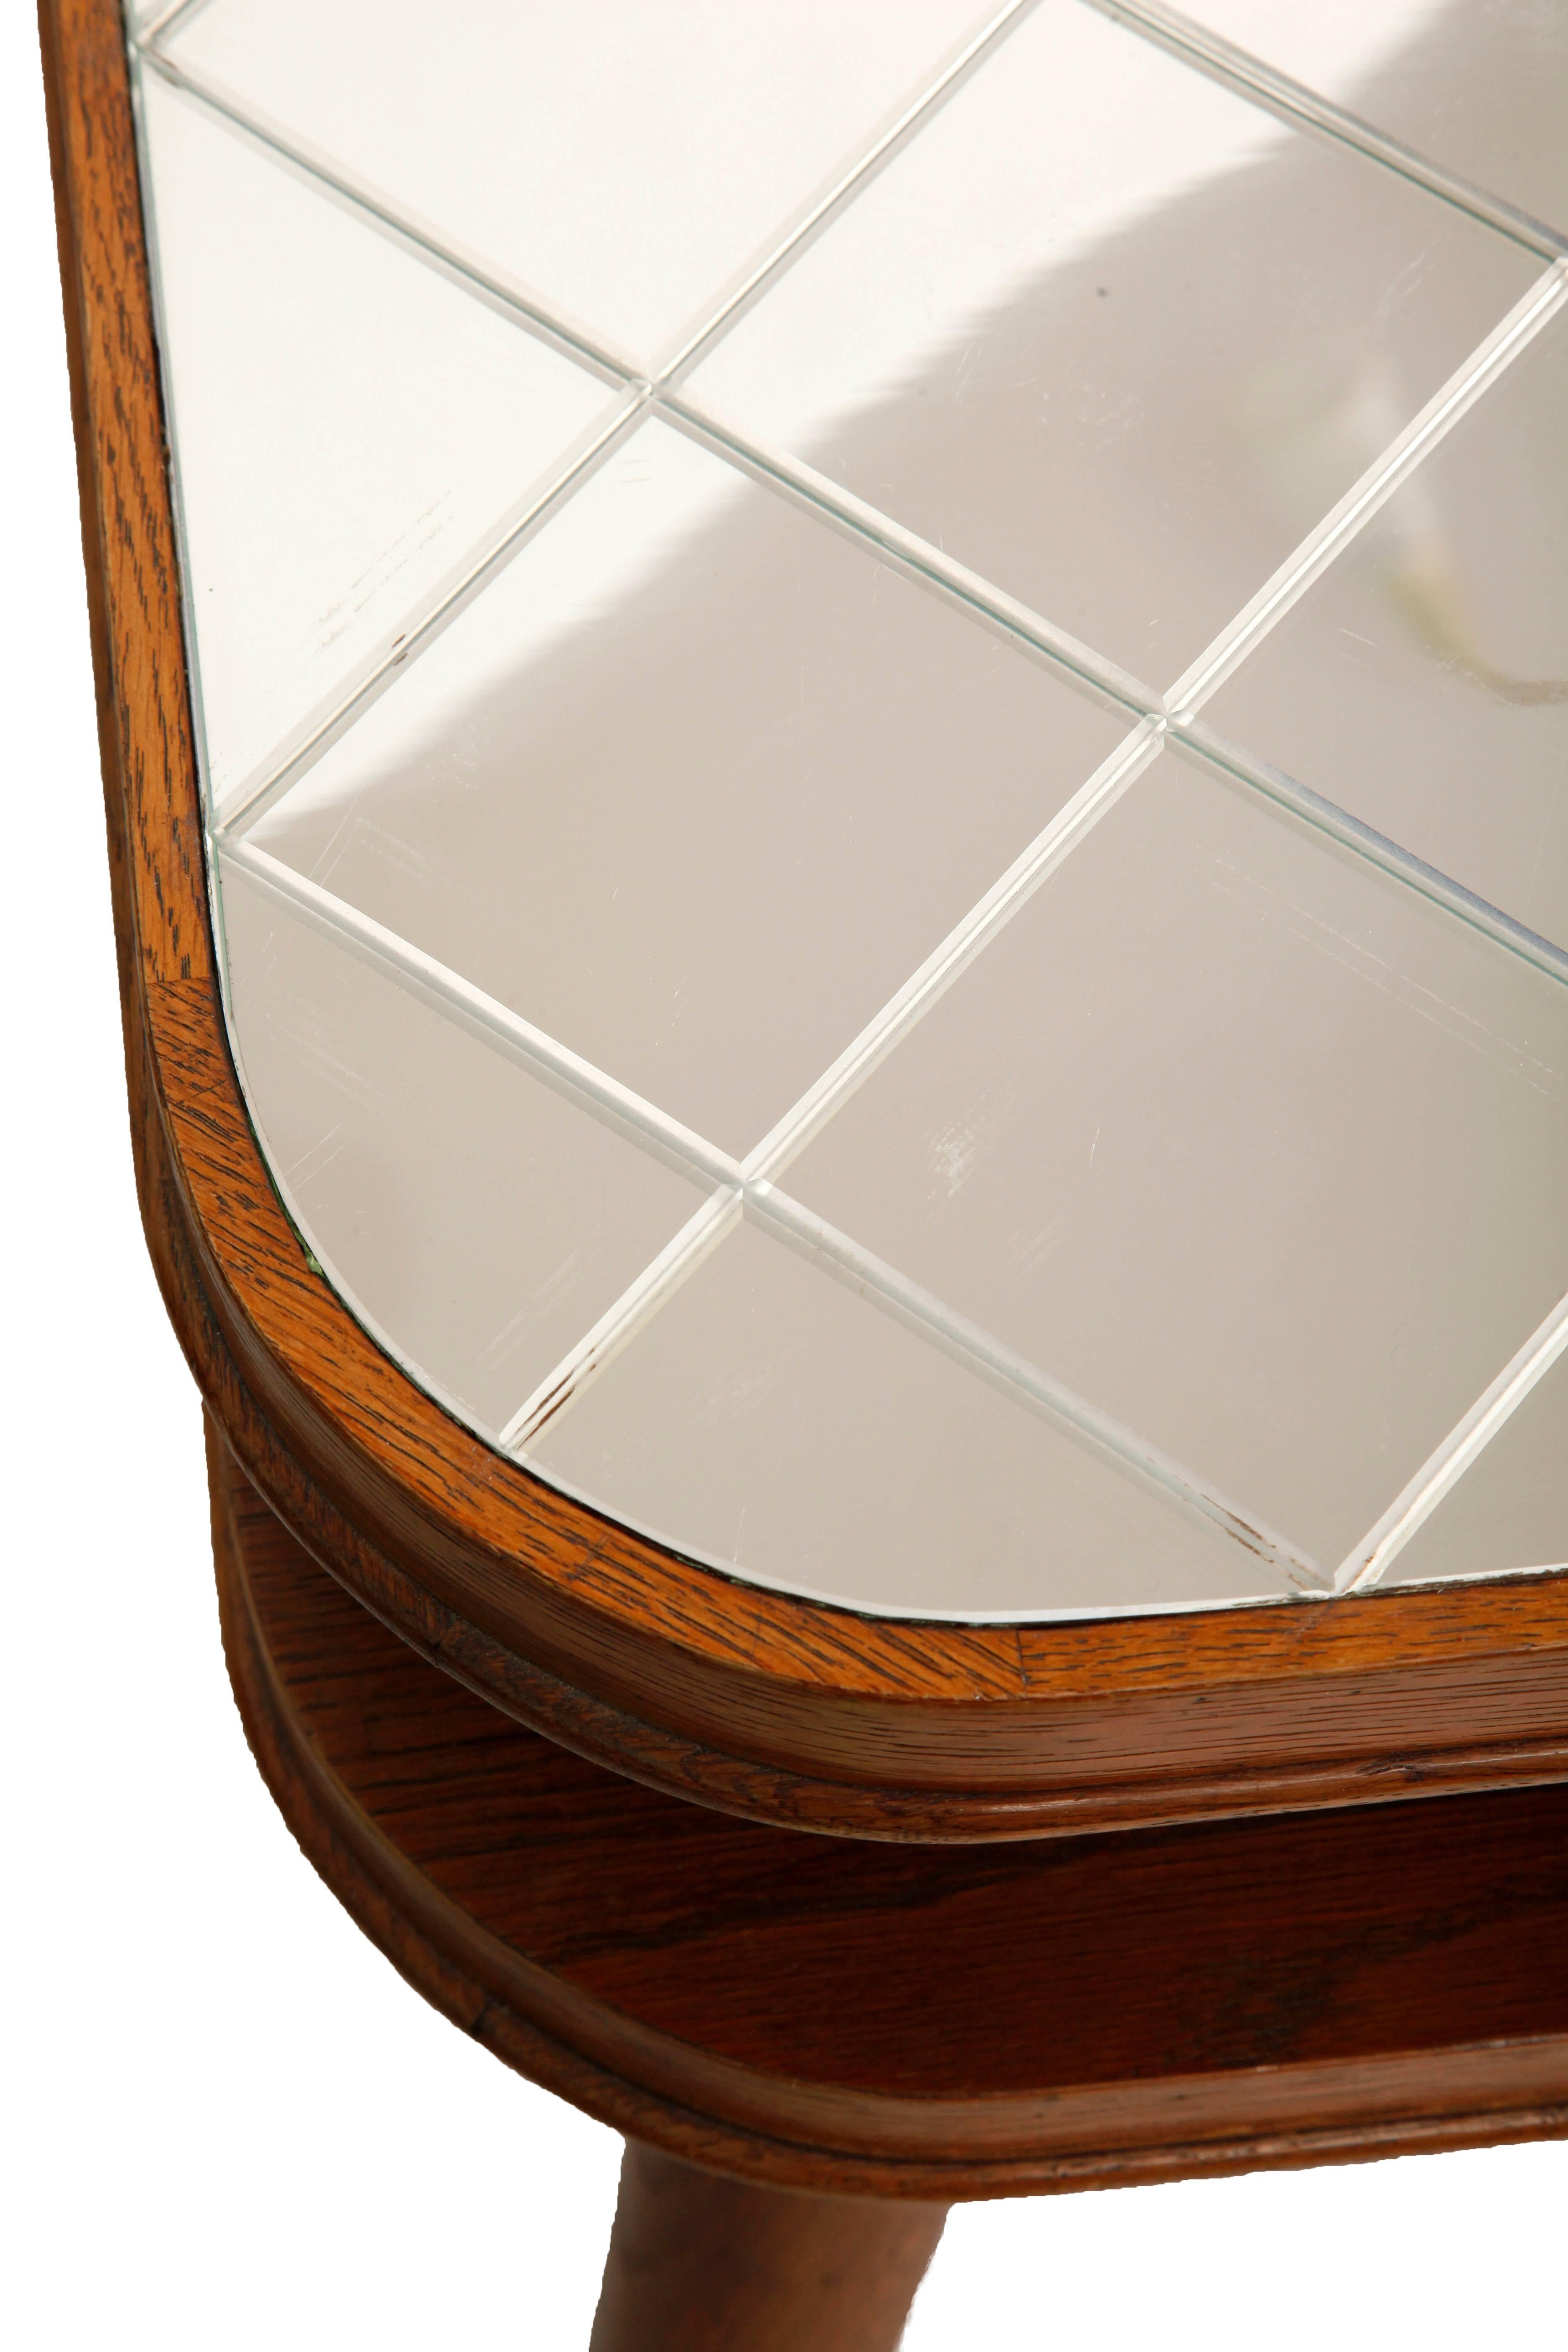  Card Table with a Mirror Top, Oak, Czech Art Deco, 1950s For Sale 5